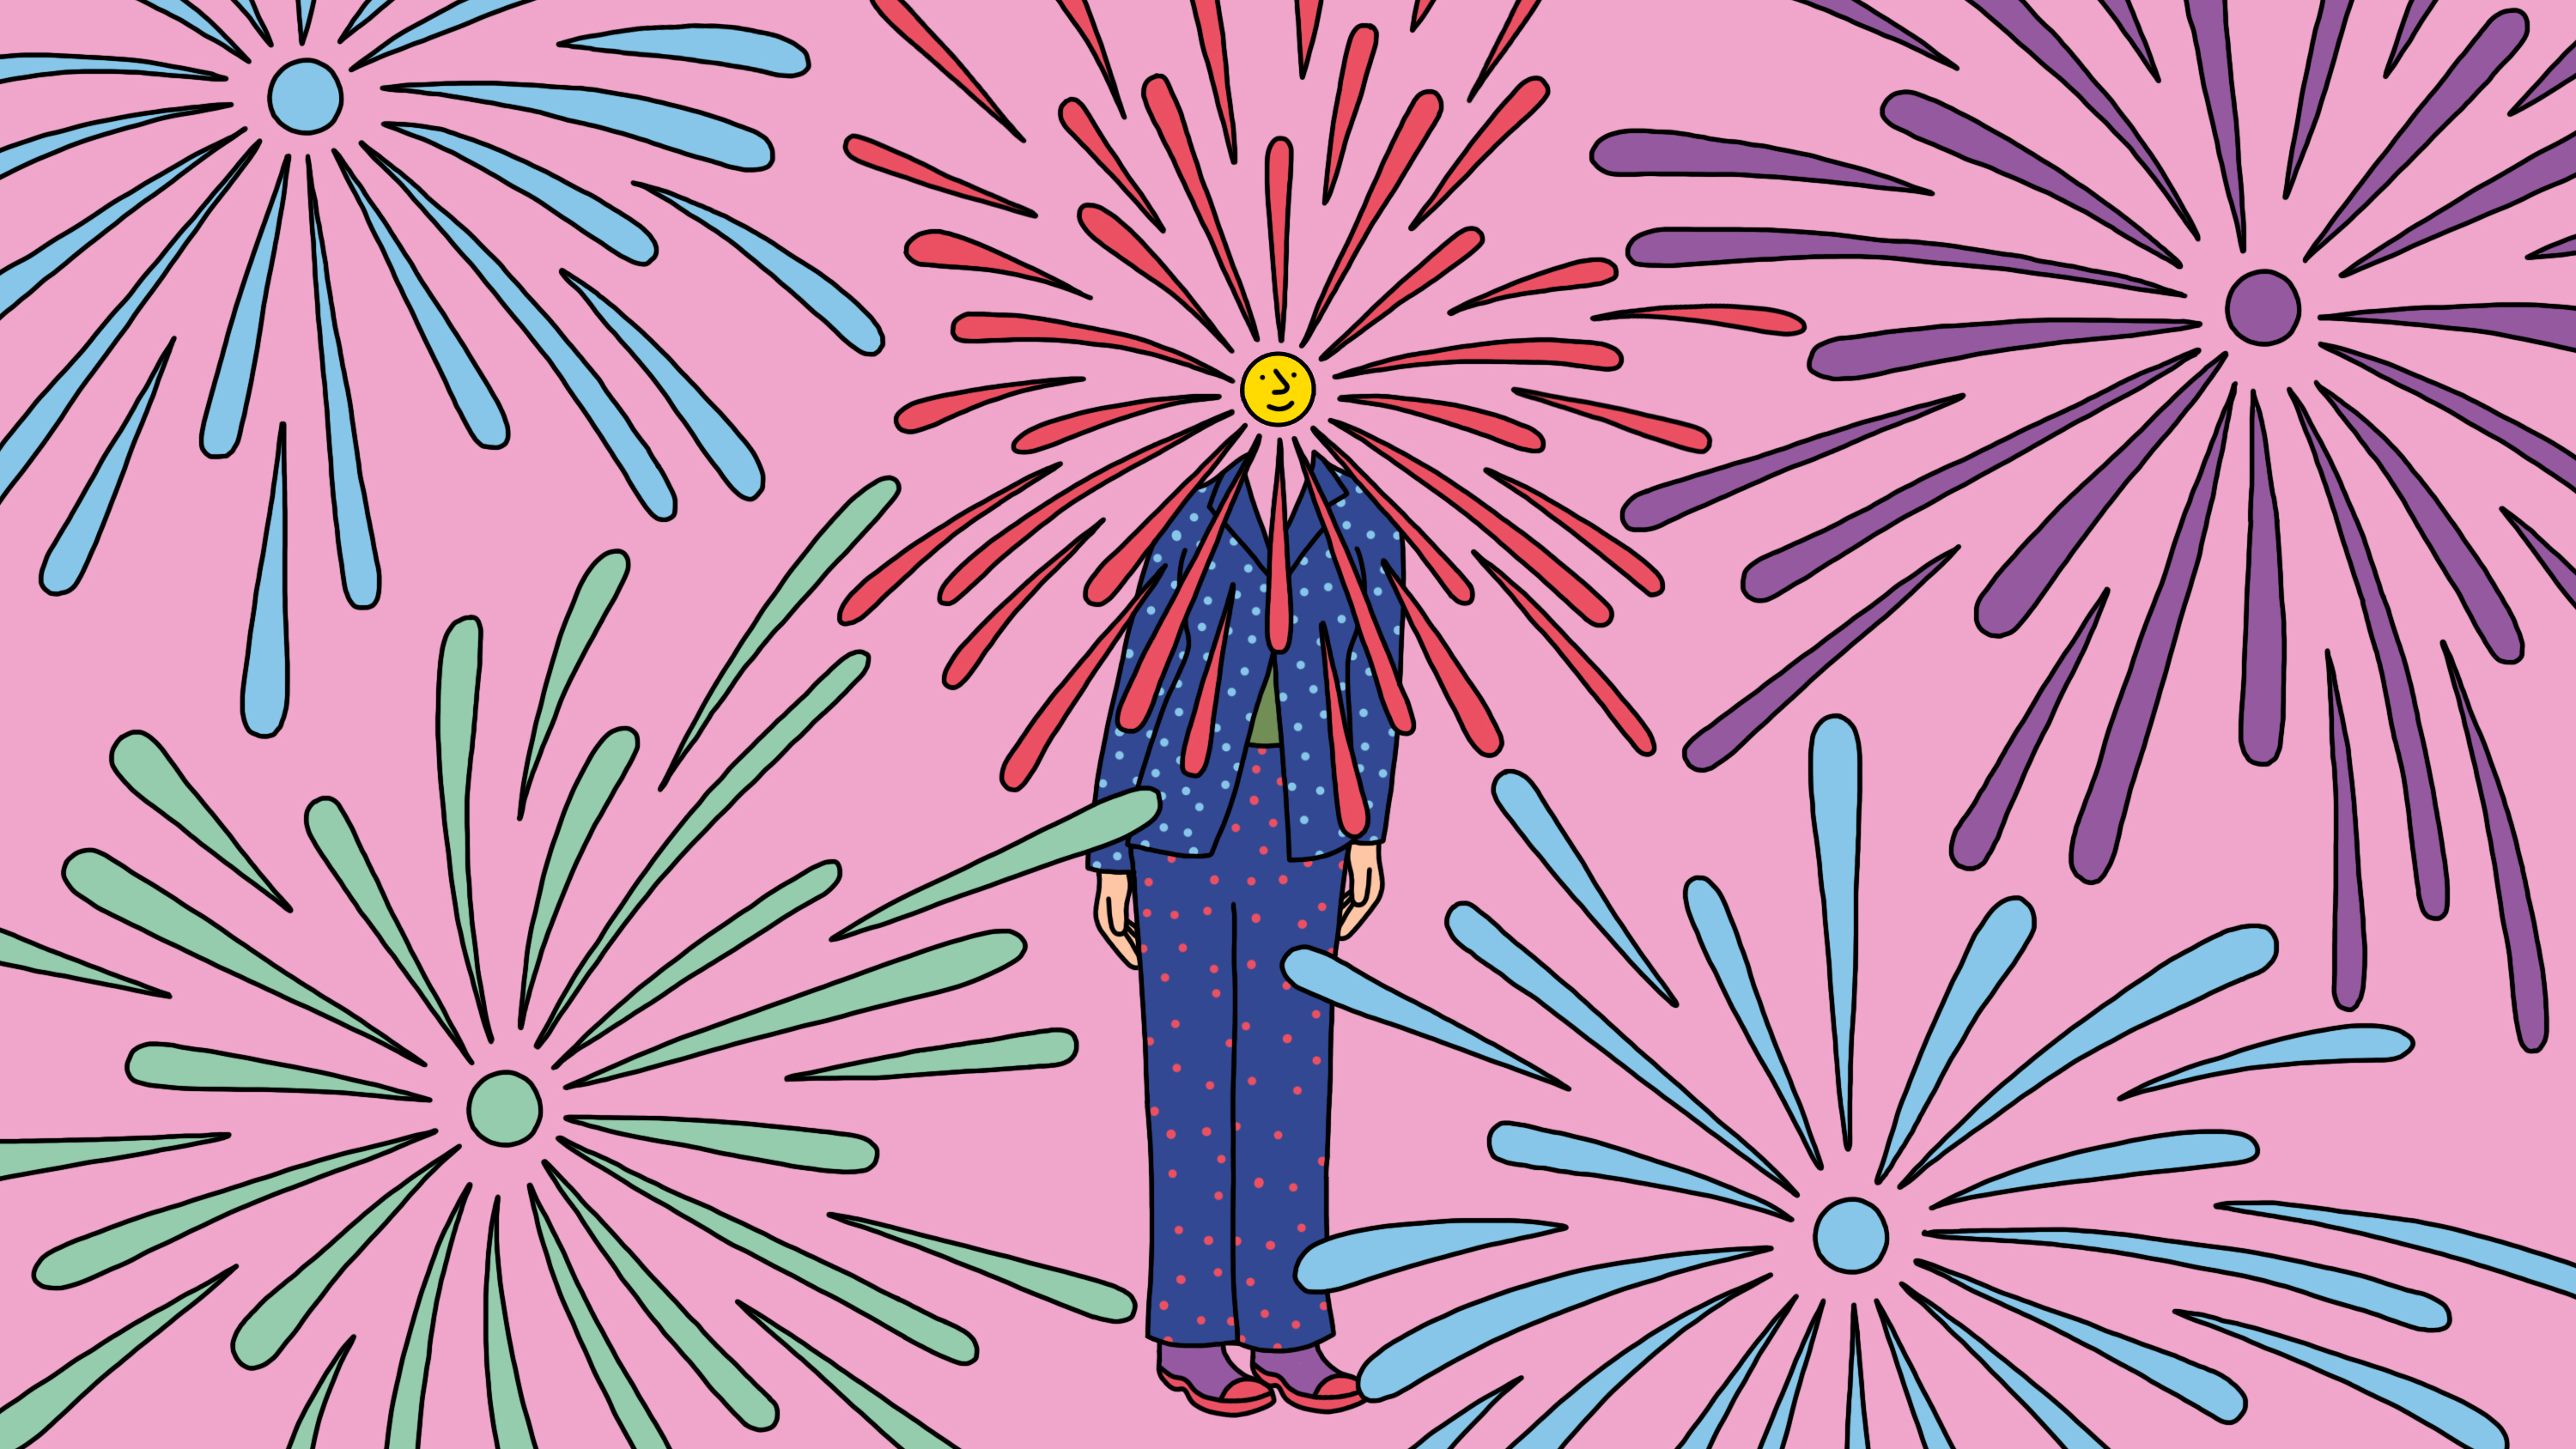 An illustration of a happy person amid exploding fireworks of color.